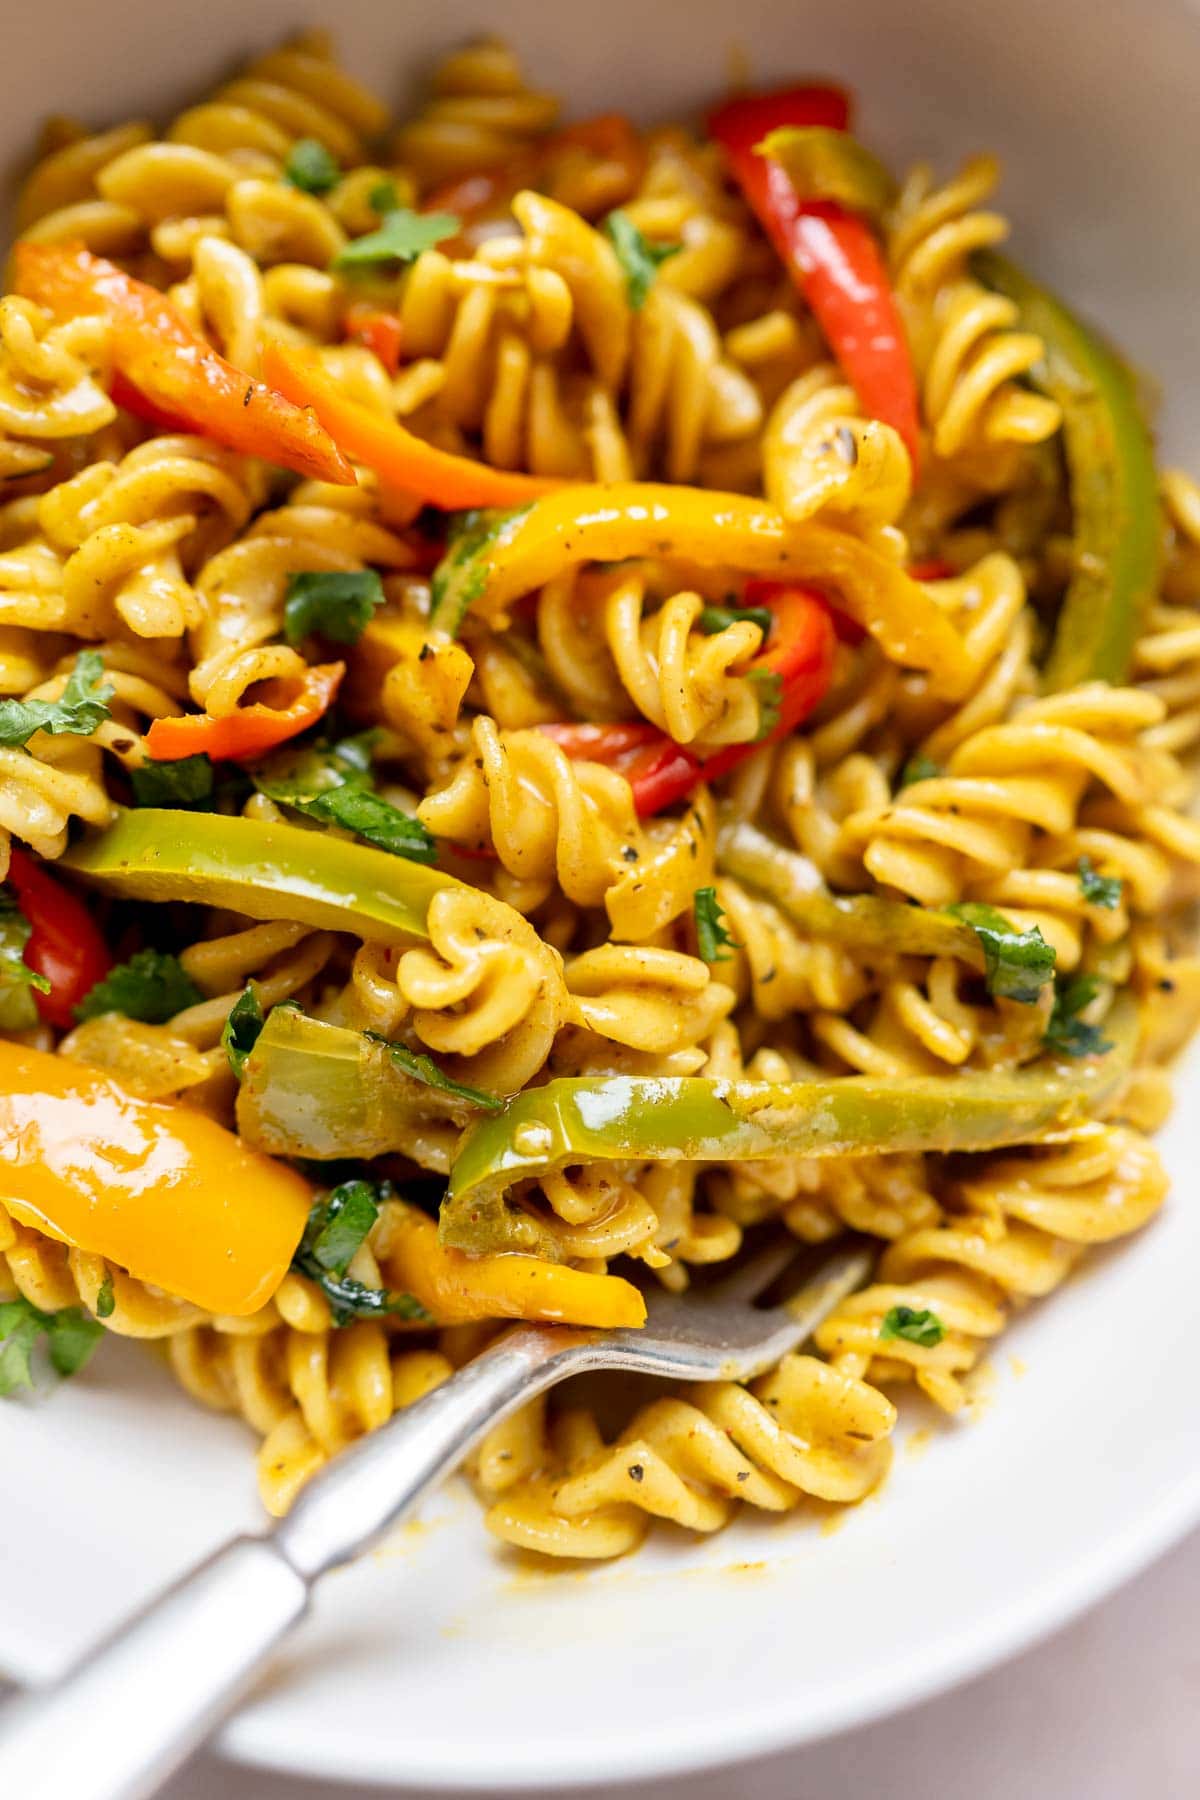 A close shot of a creamy, yellow-colored pasta dish dotted with several colors of sliced bell peppers.